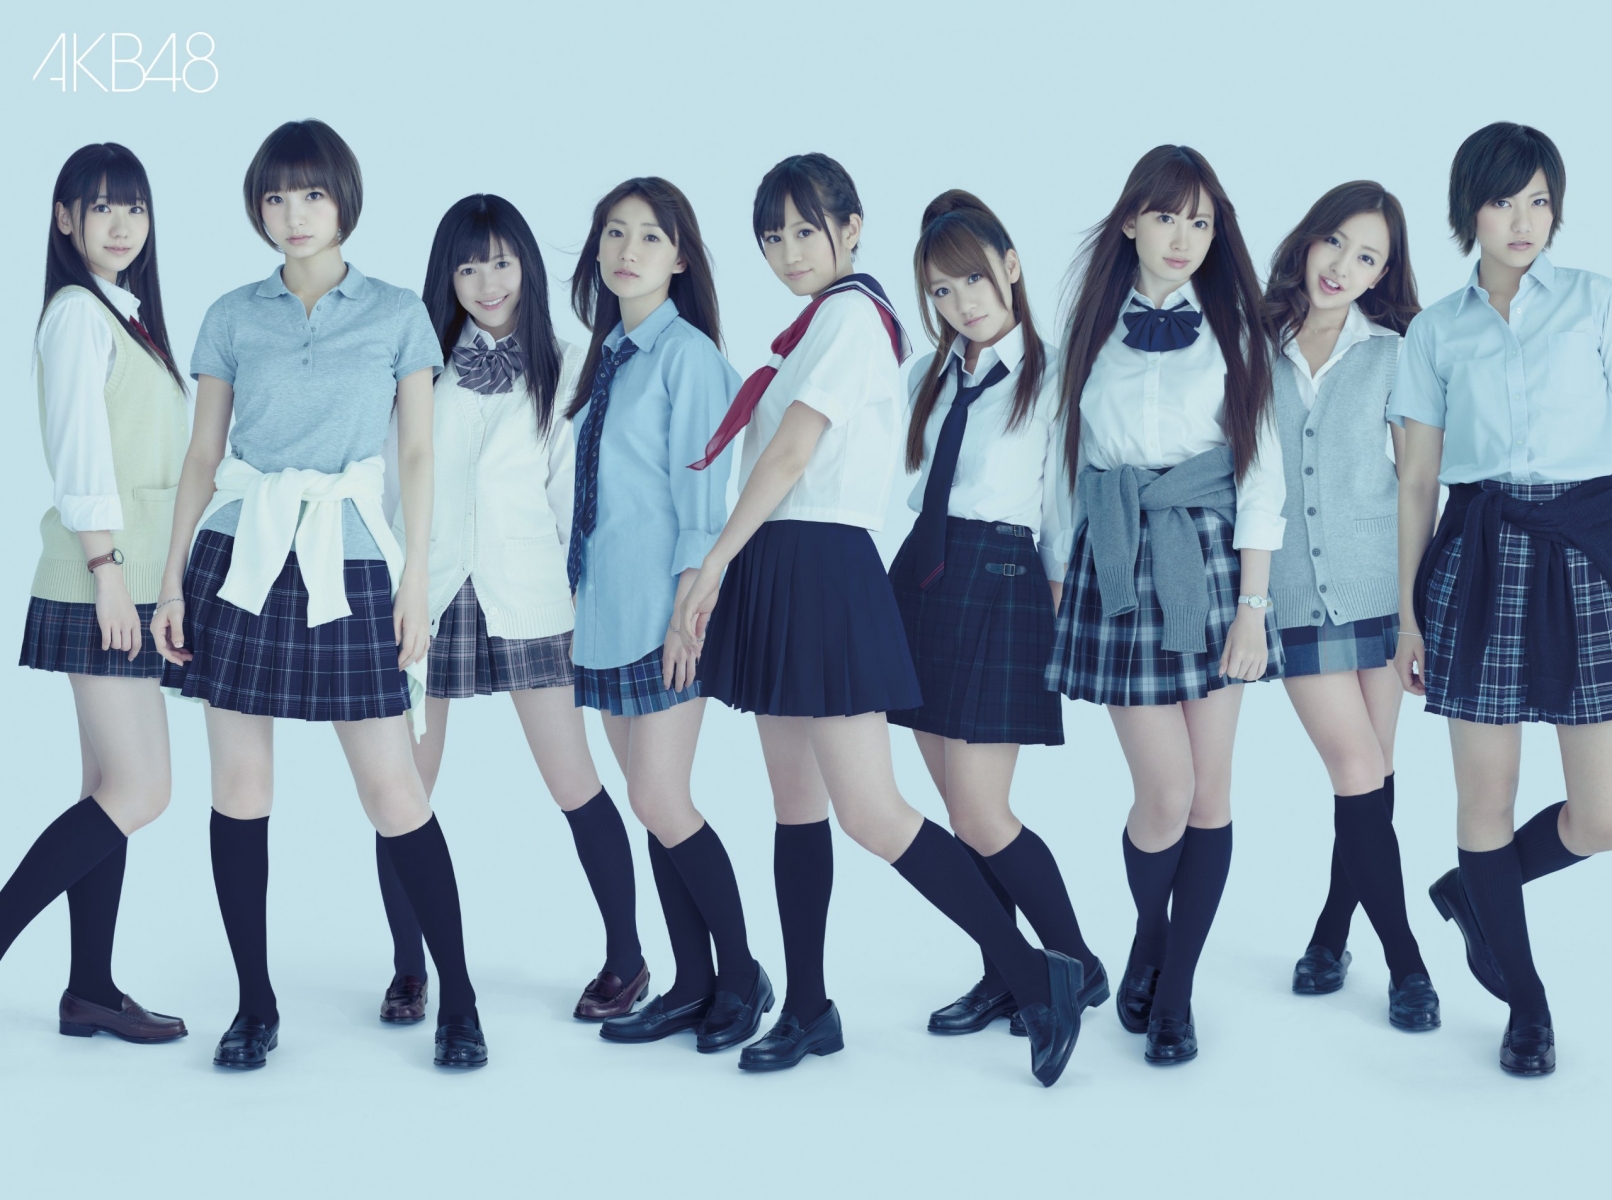 Learn All About Japanese Girls’ School Uniforms and Become an Expert!